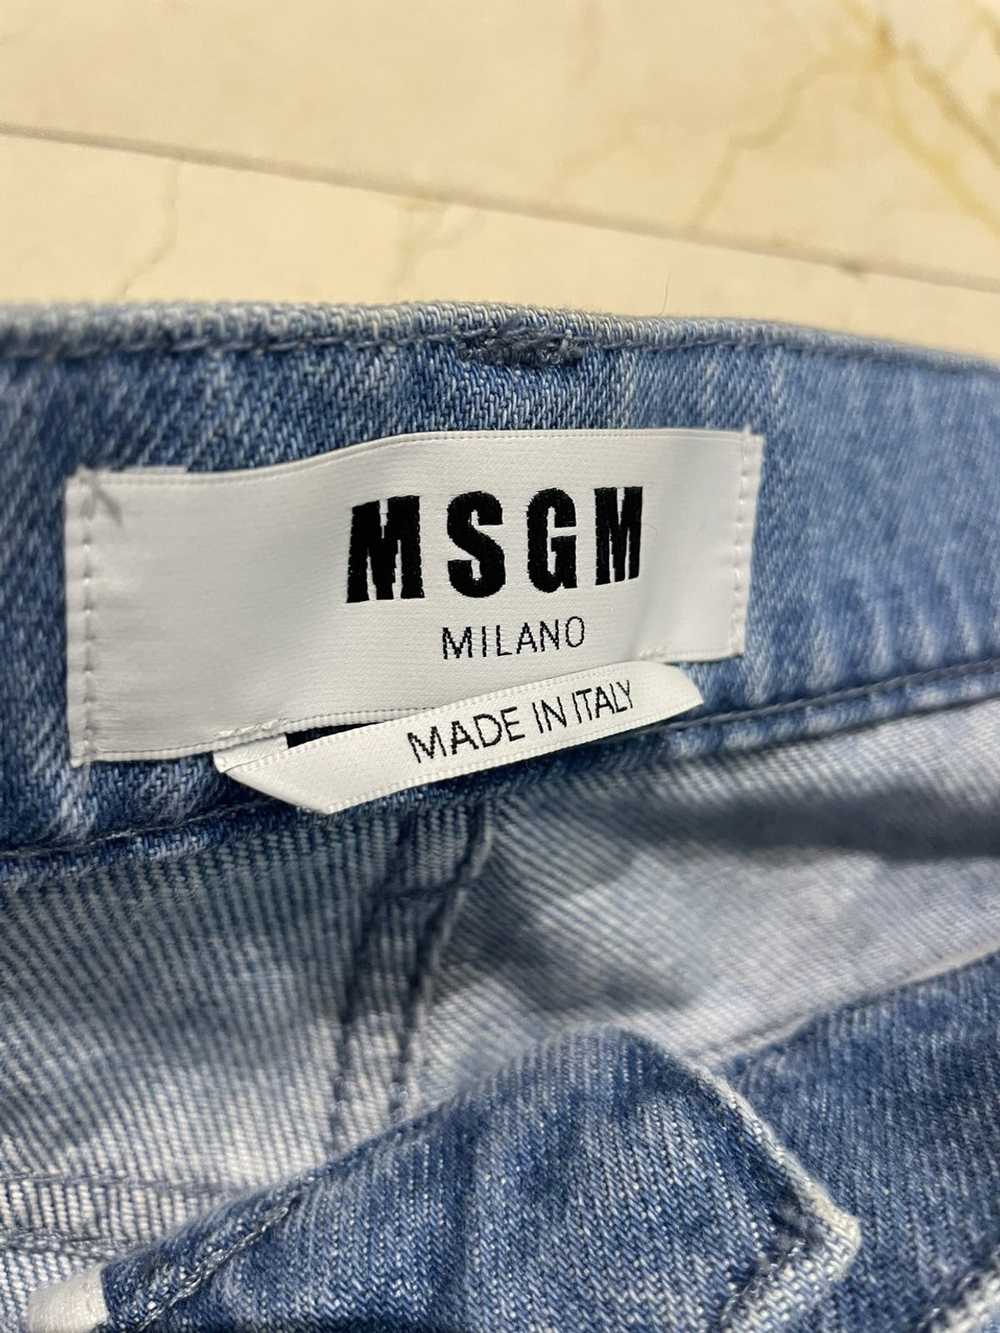 MSGM MSGM Blue Water Effect Jeans - image 3